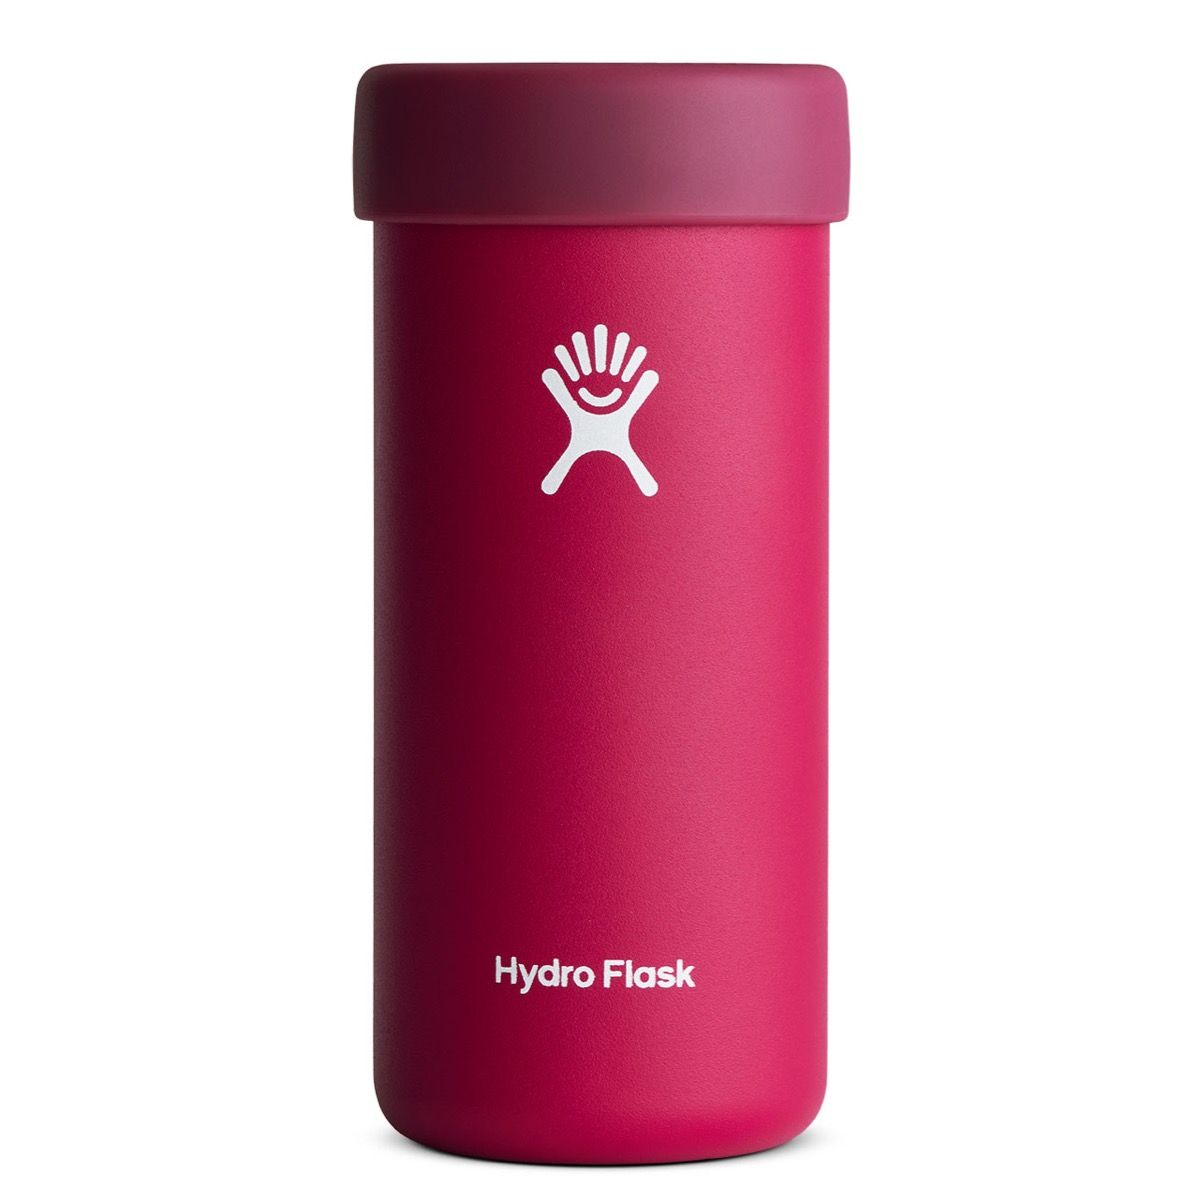 Hydro Flask All Around Tumbler - Stainless Steel Insulated With Lid 16 Oz -  Snapper T16CP604 - Jacob Time Inc